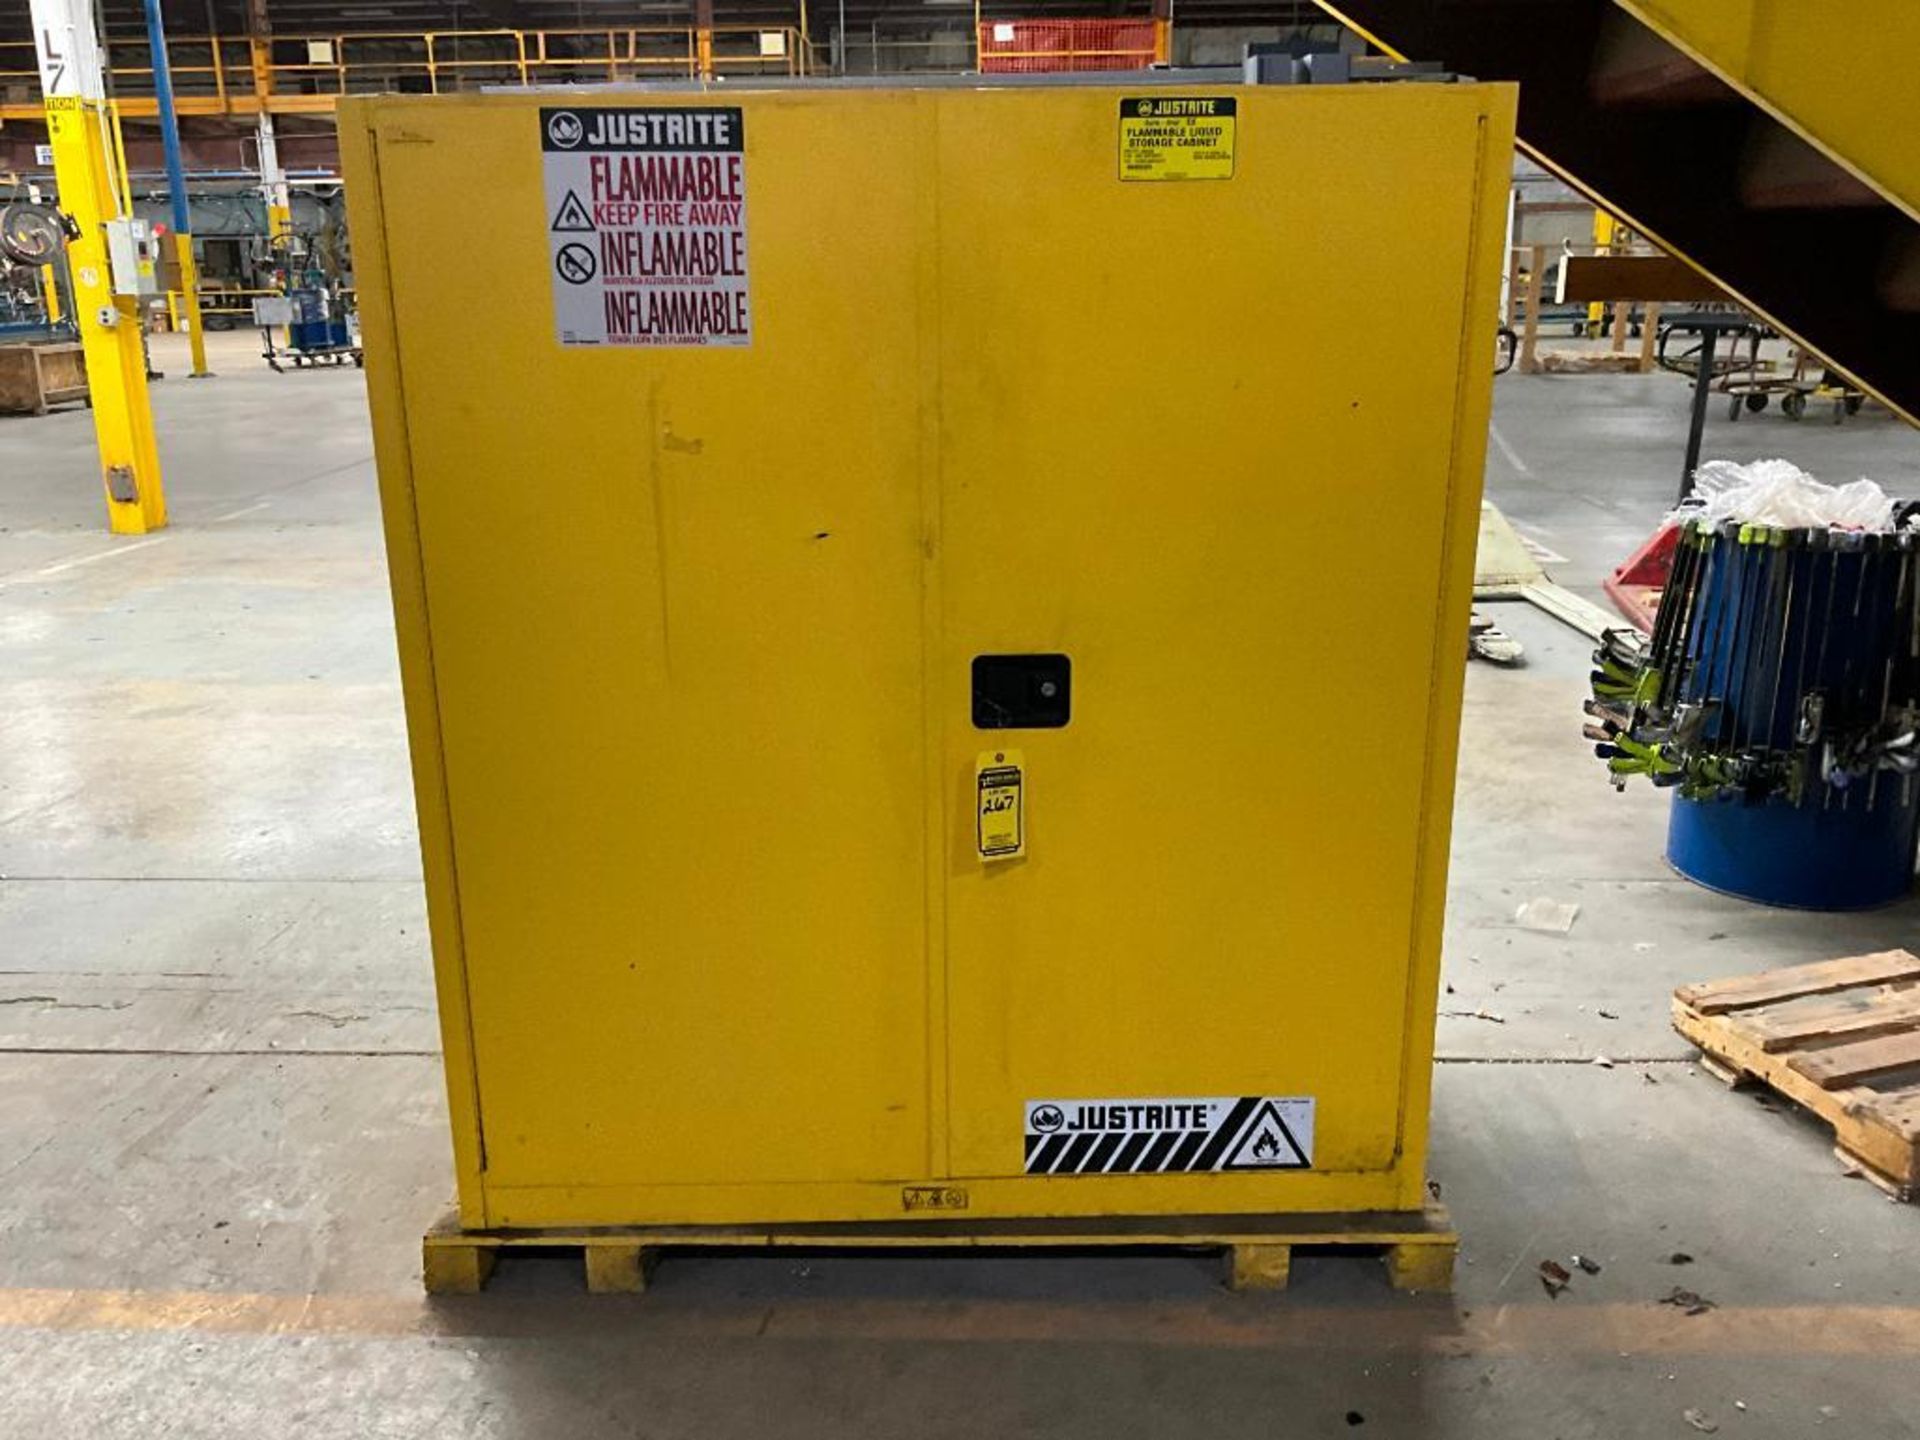 Justrite Safety Cabinet w/ Contents, 66" H x 59" W x 34" D